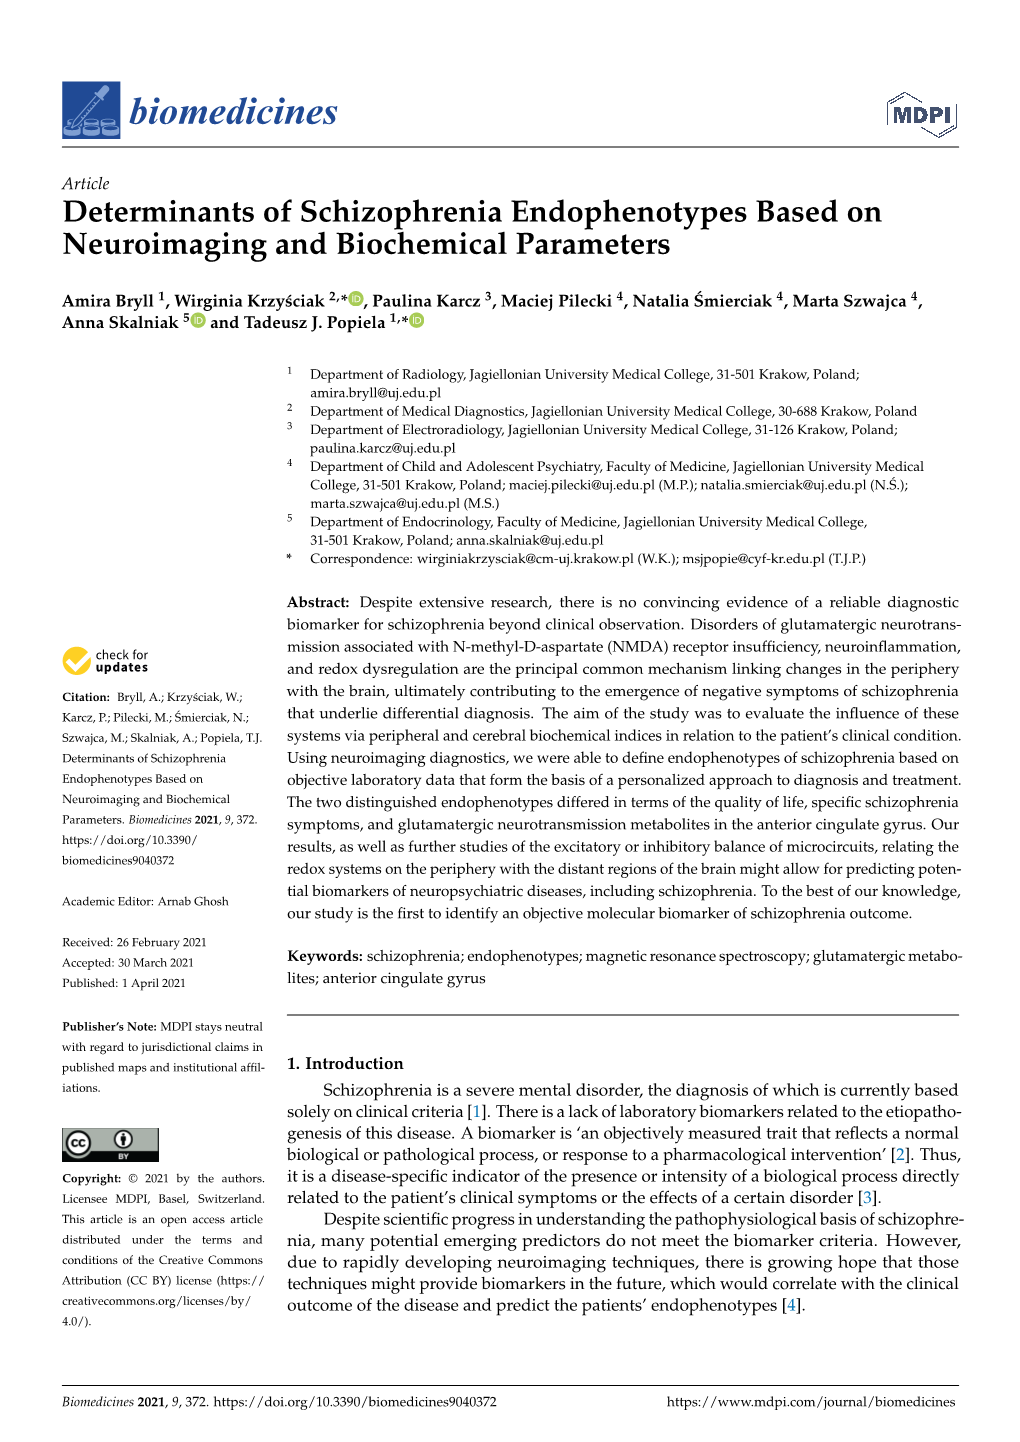 Determinants of Schizophrenia Endophenotypes Based on Neuroimaging and Biochemical Parameters